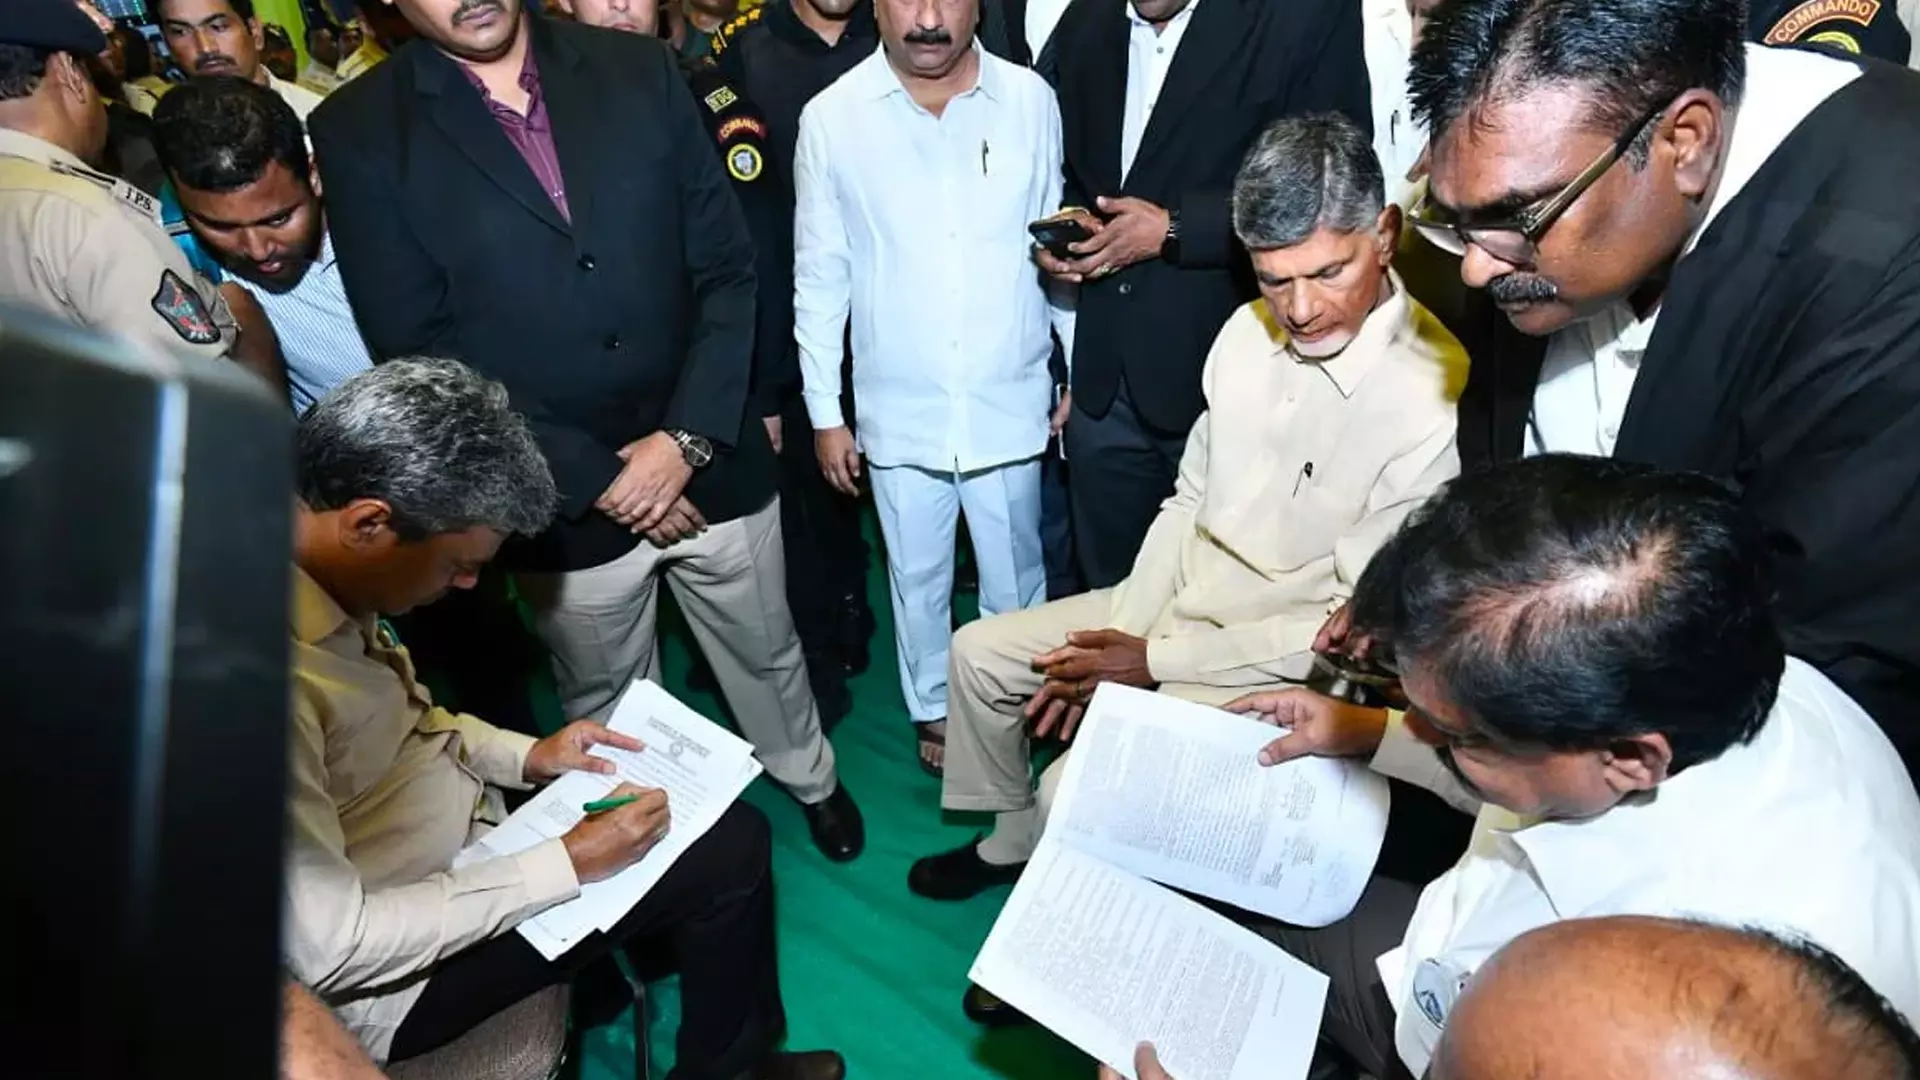 TDP to move SC seeking relief for party chief Chandrababu Naidu